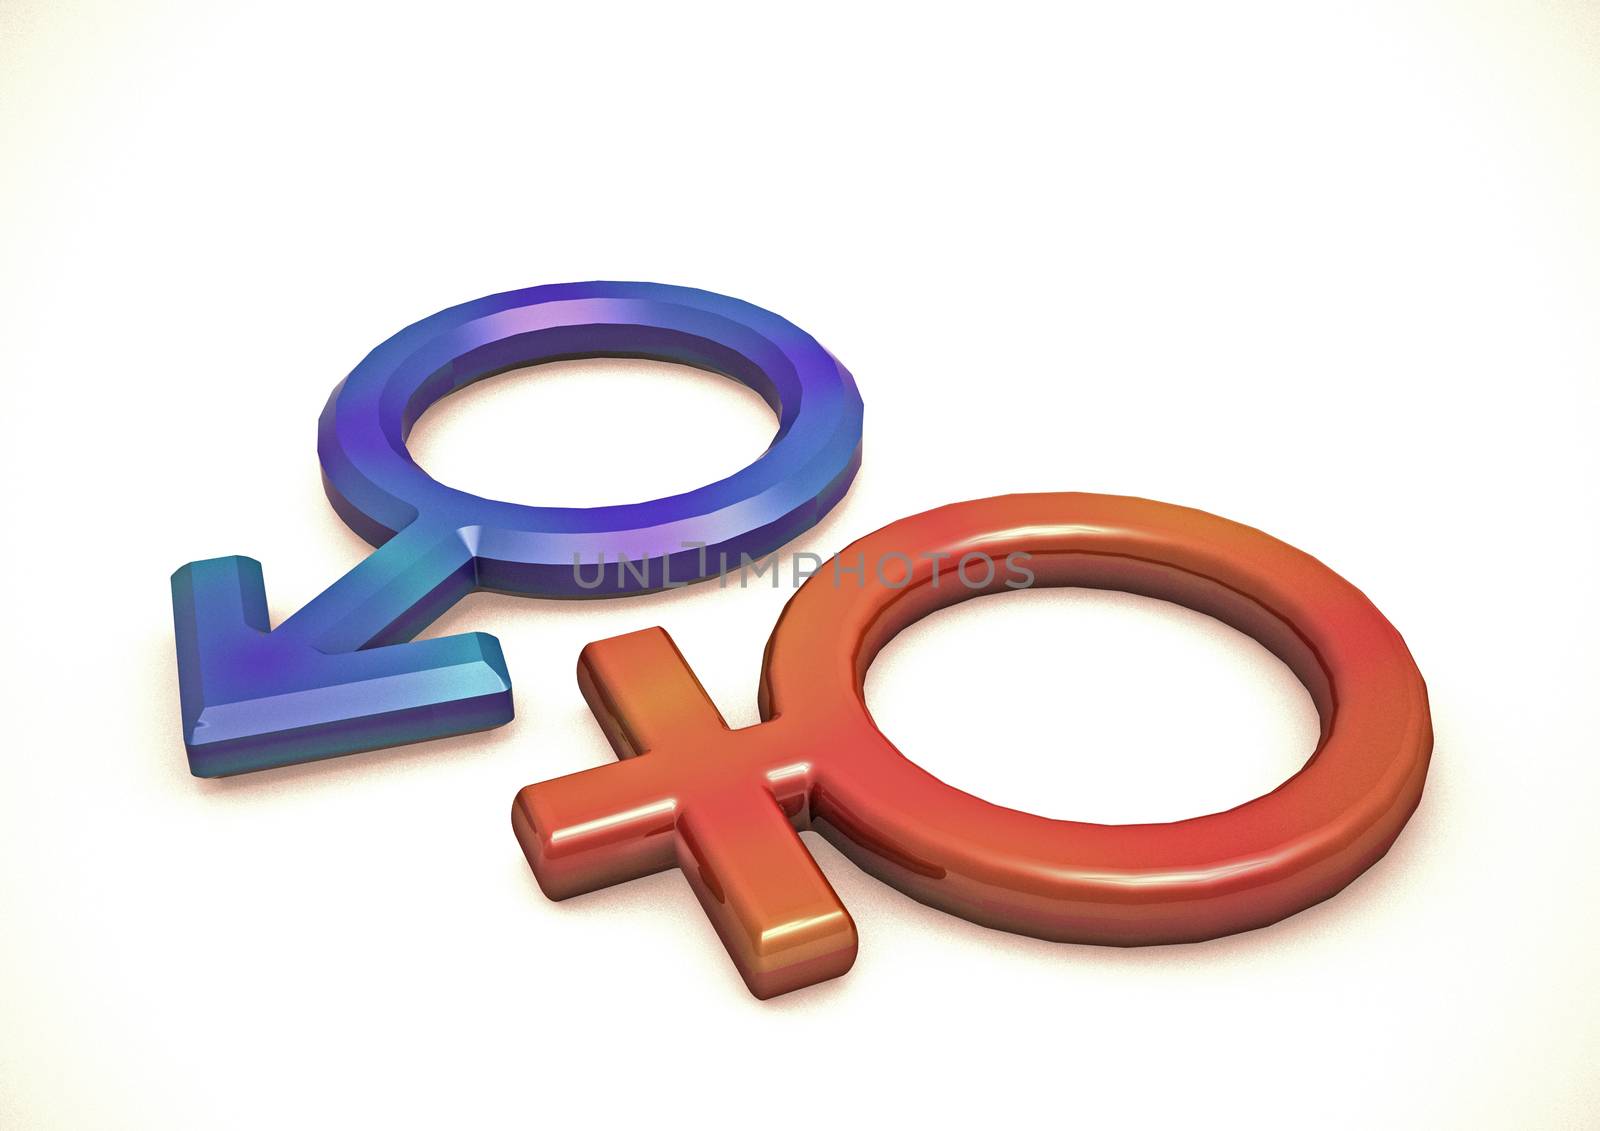 Dimensional man's and female signs on a white background. 3D render.